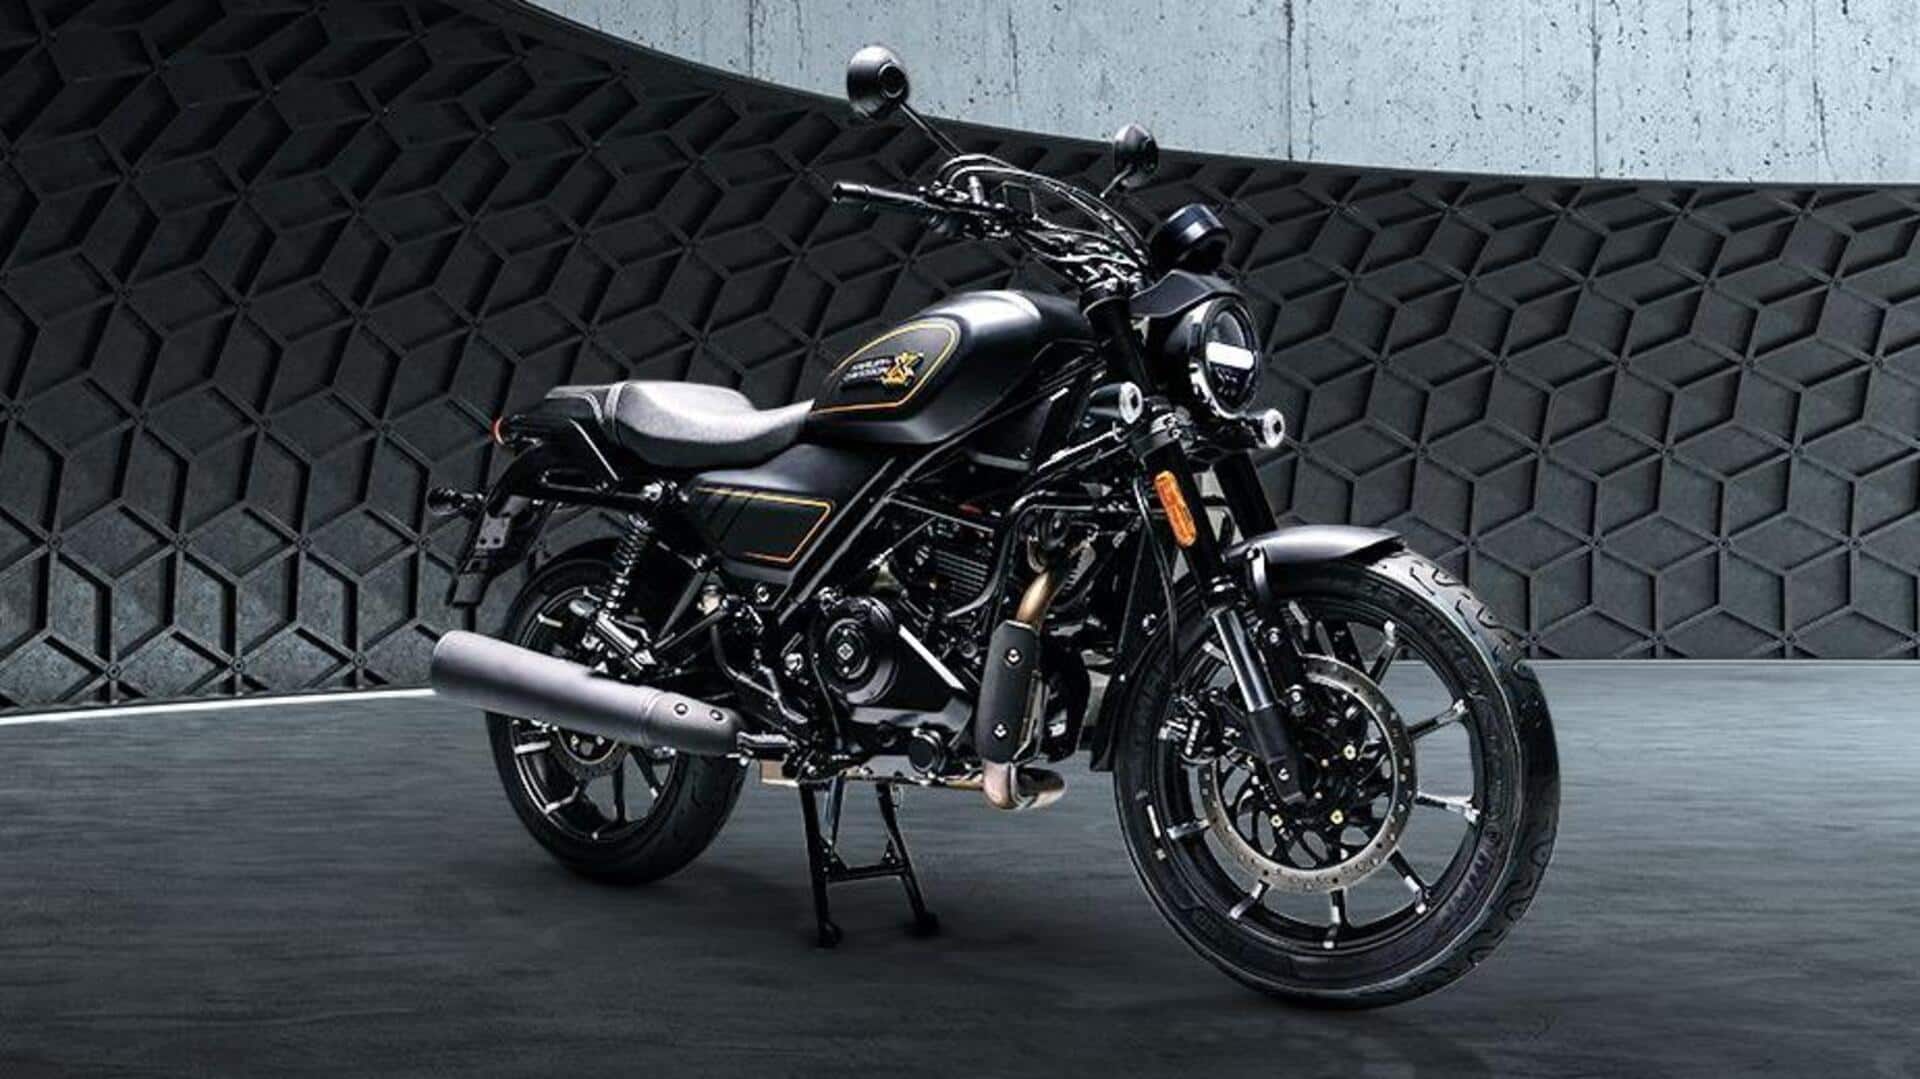 Harley-Davidson's most affordable motorcycle debuts in India at Rs. 2.29L